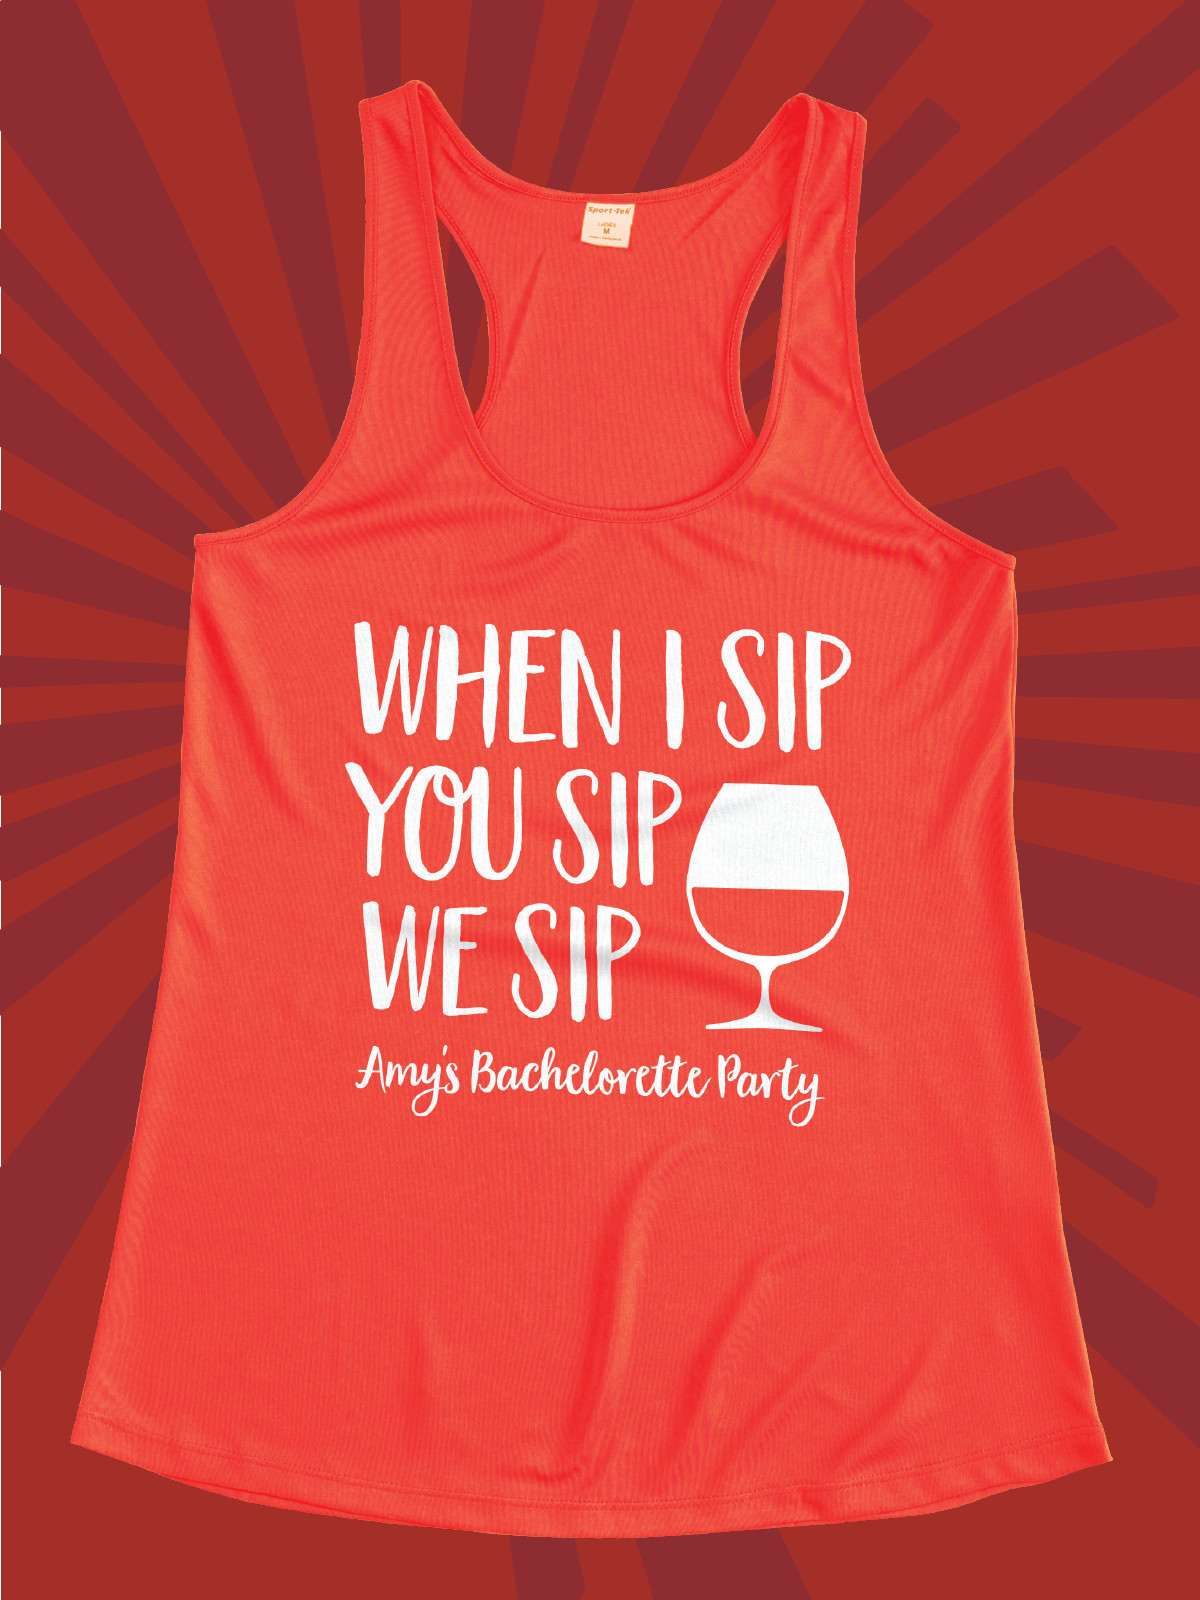 Bachelorette Party T Shirt Ideas
 Funny and Trendy Bachelor & Bachelorette Party Shirts